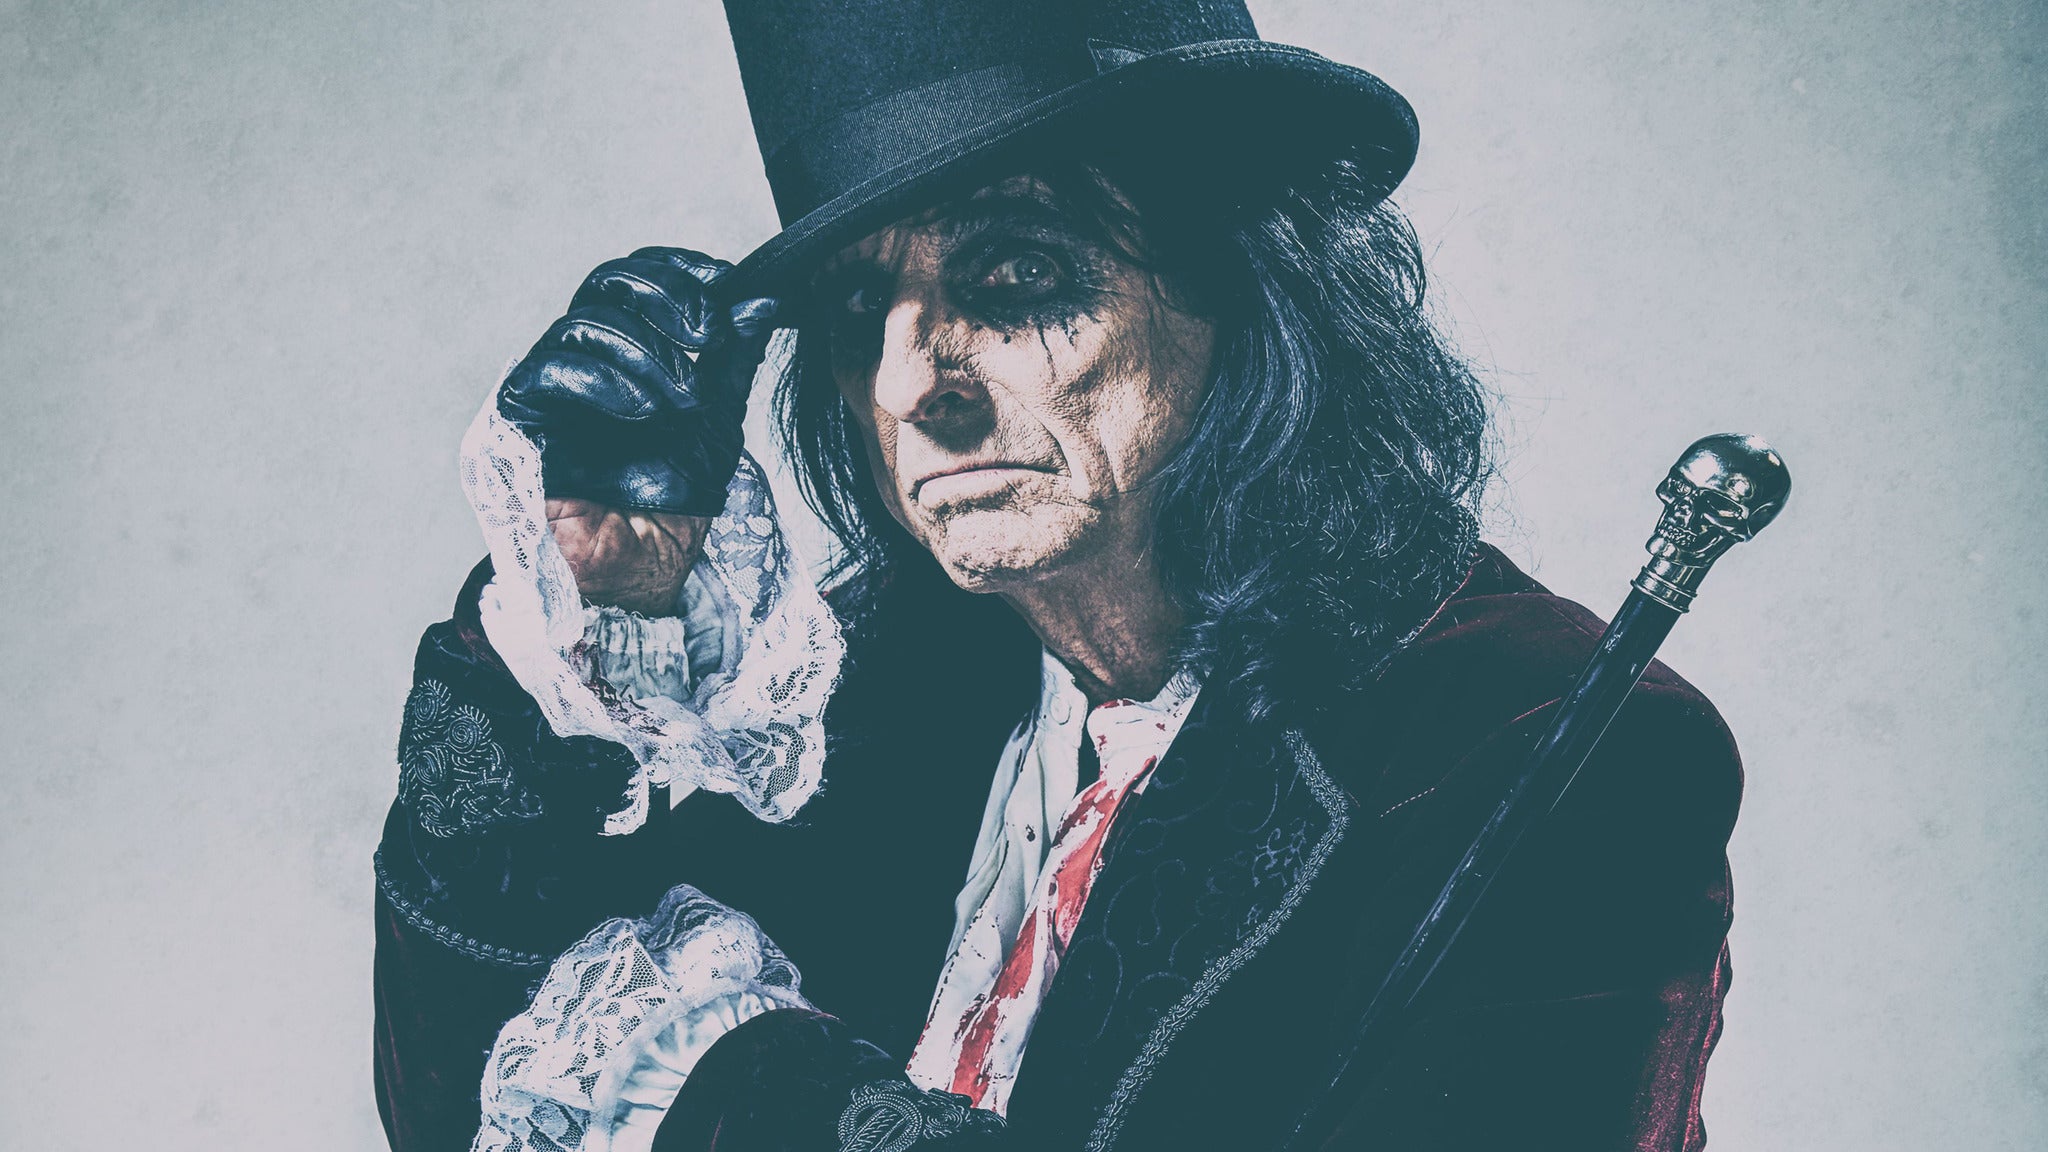 Alice Cooper brings the Ol’ Black Eyes is Back Tour to the Abbotsford Centre in 2020!